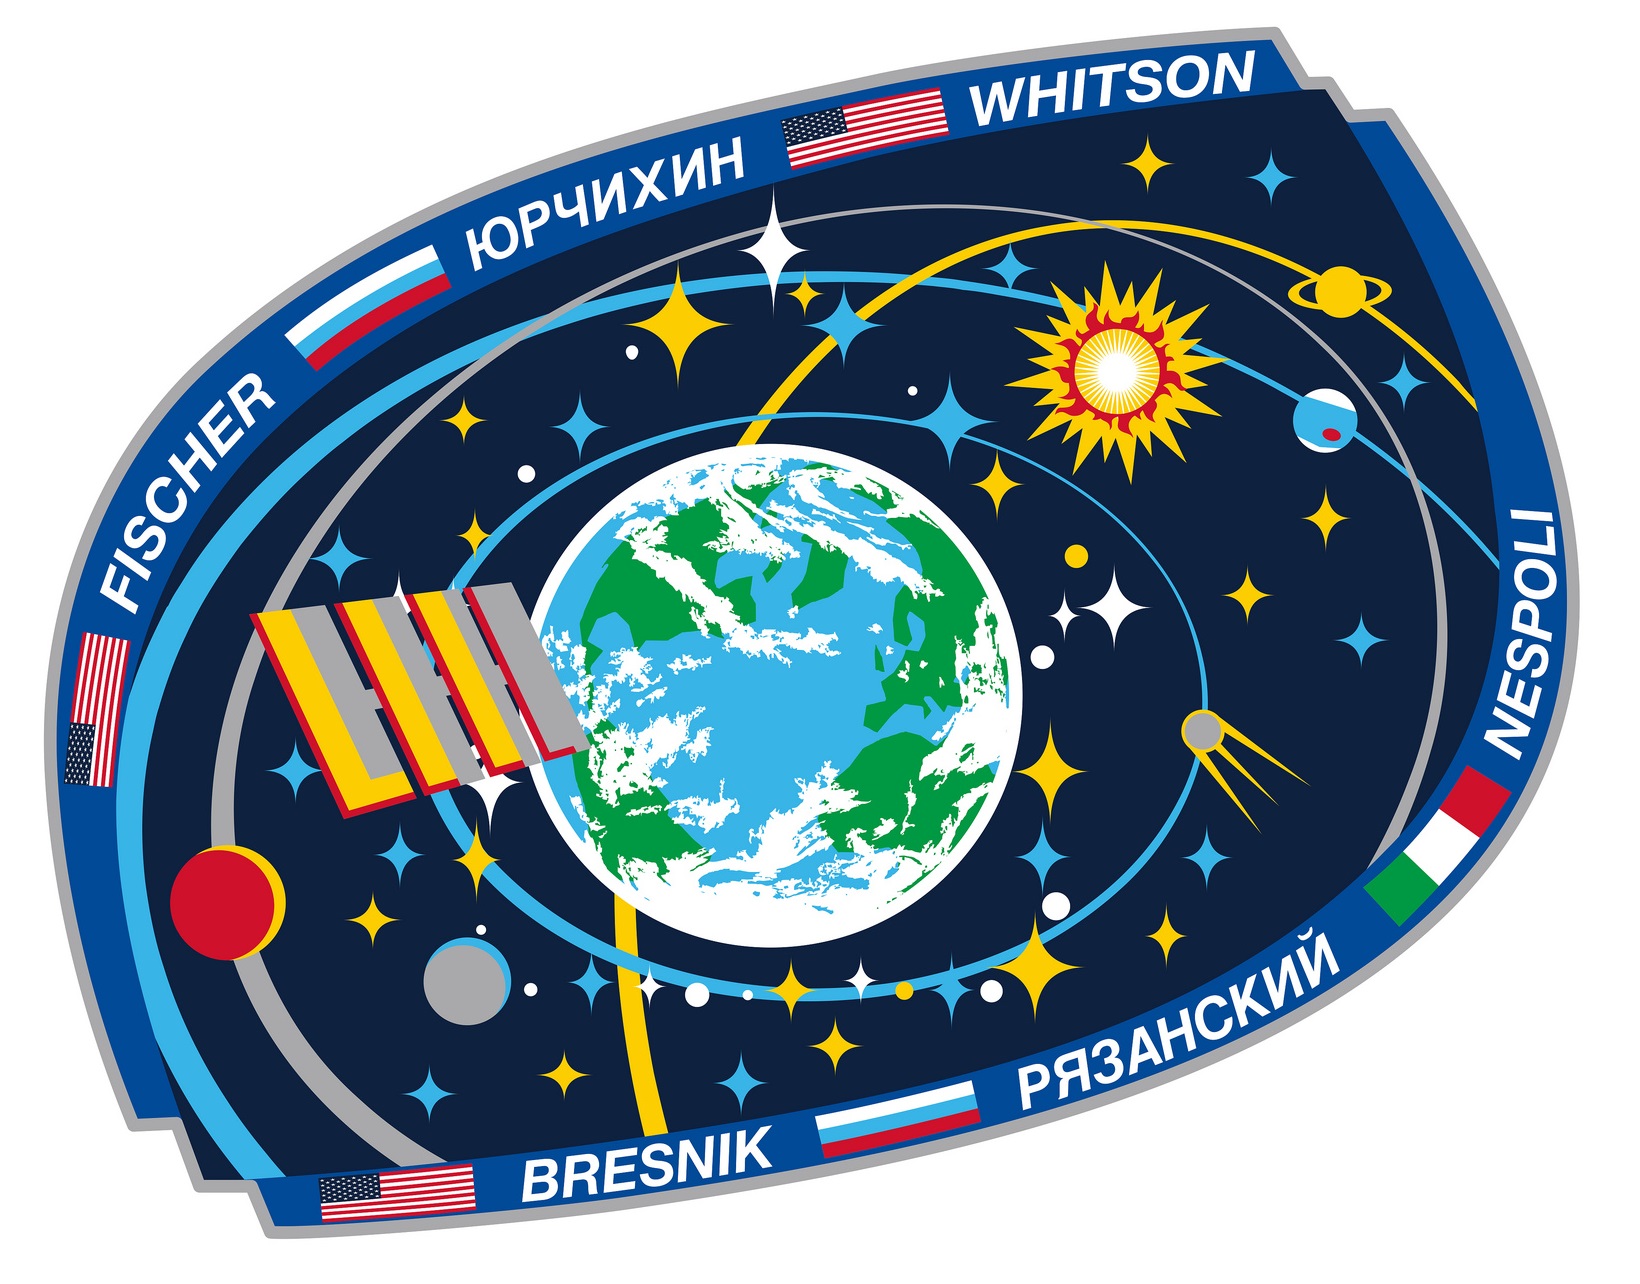 ISS Expedition 52 Crew Patch - Credit: NASA/Roscosmos 